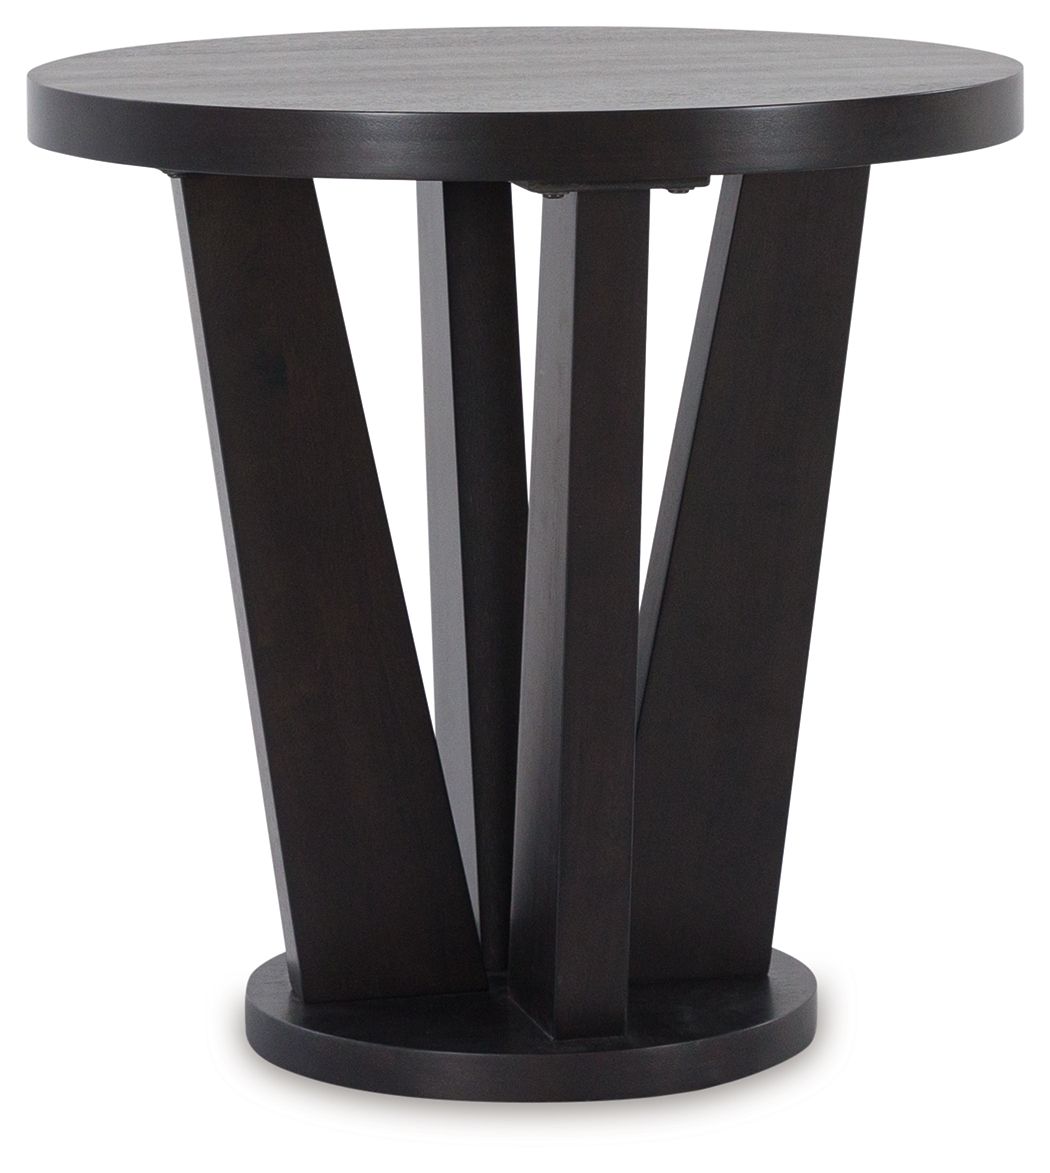 Chasinfield - Dark Brown - Round End Table Tony's Home Furnishings Furniture. Beds. Dressers. Sofas.